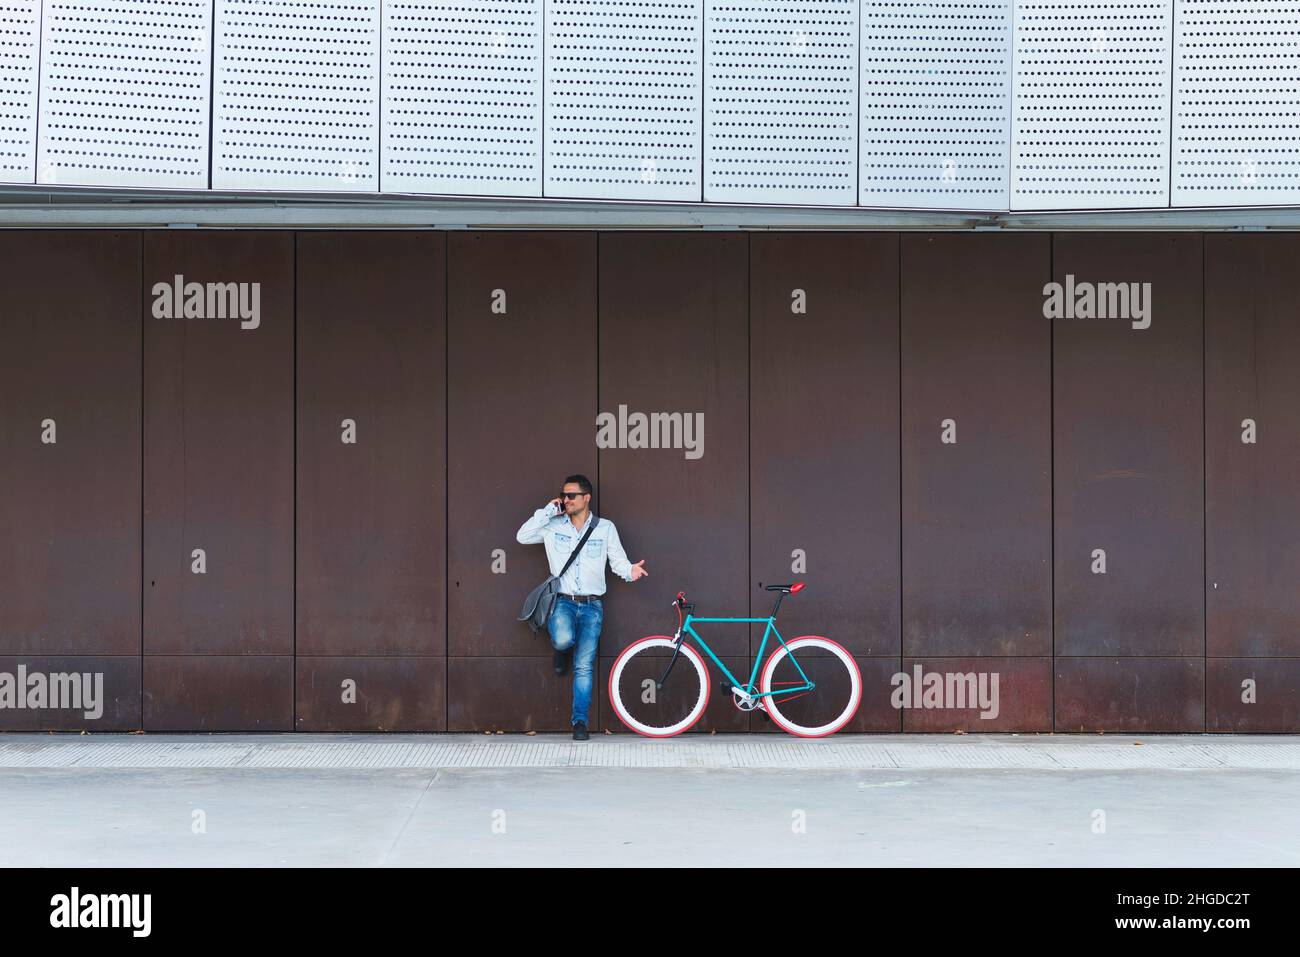 Young male with sunglasses and shoulder bag standing nest to a fixed gear bike while calling by phone Stock Photo